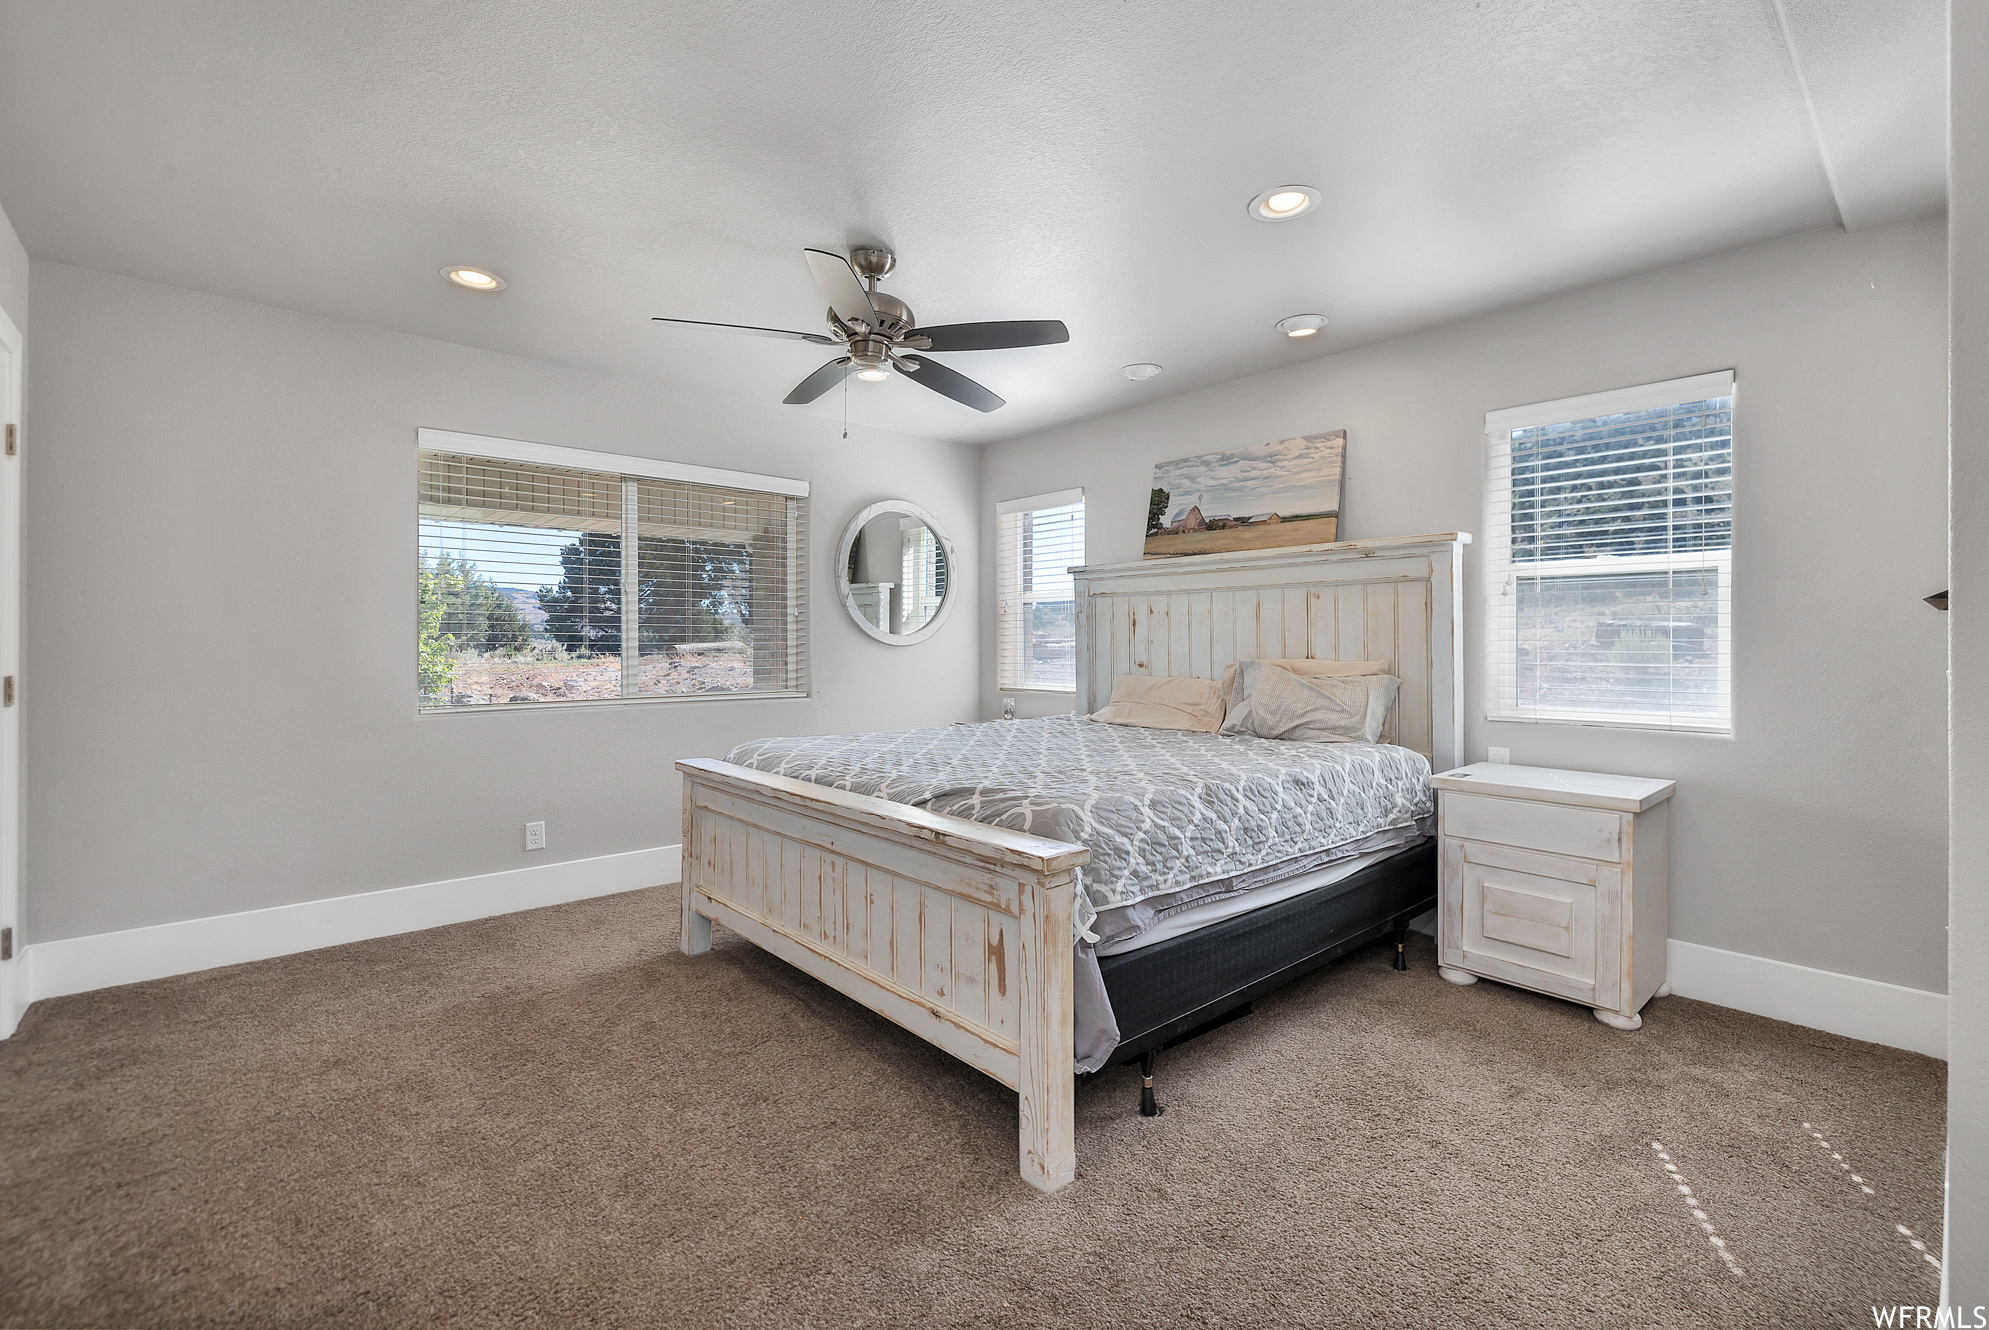 Carpeted bedroom featuring a ceiling fan and natural light